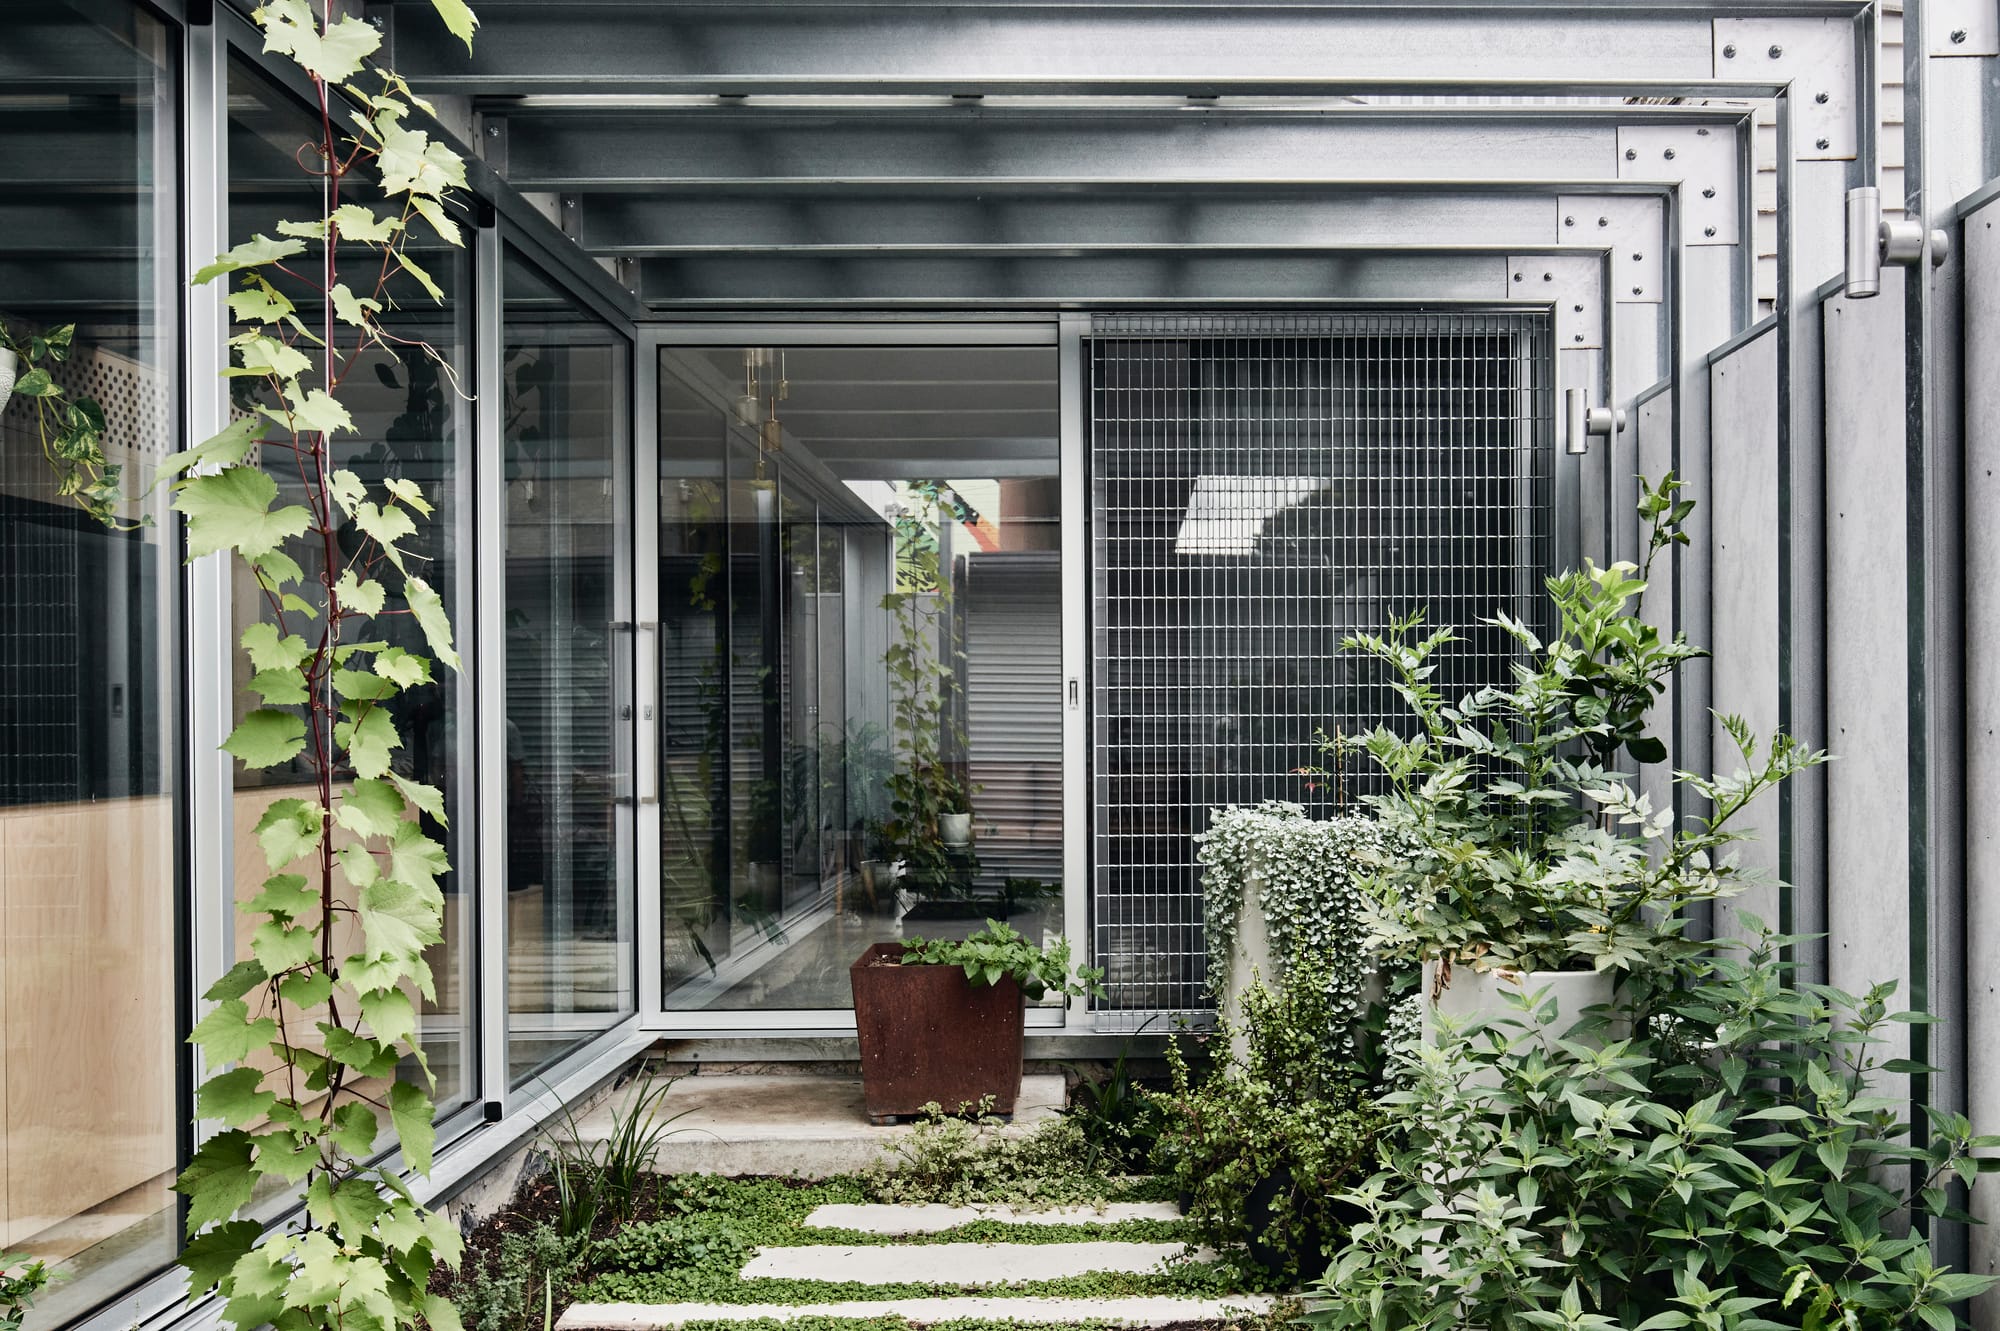 That Old Chestnut by FIGR. Architecture & Design. Photography by Tom Blachford. Exterior courtyard in industrial style. Steel framed windows and ceiling. Lots of plant life growing wildly. 